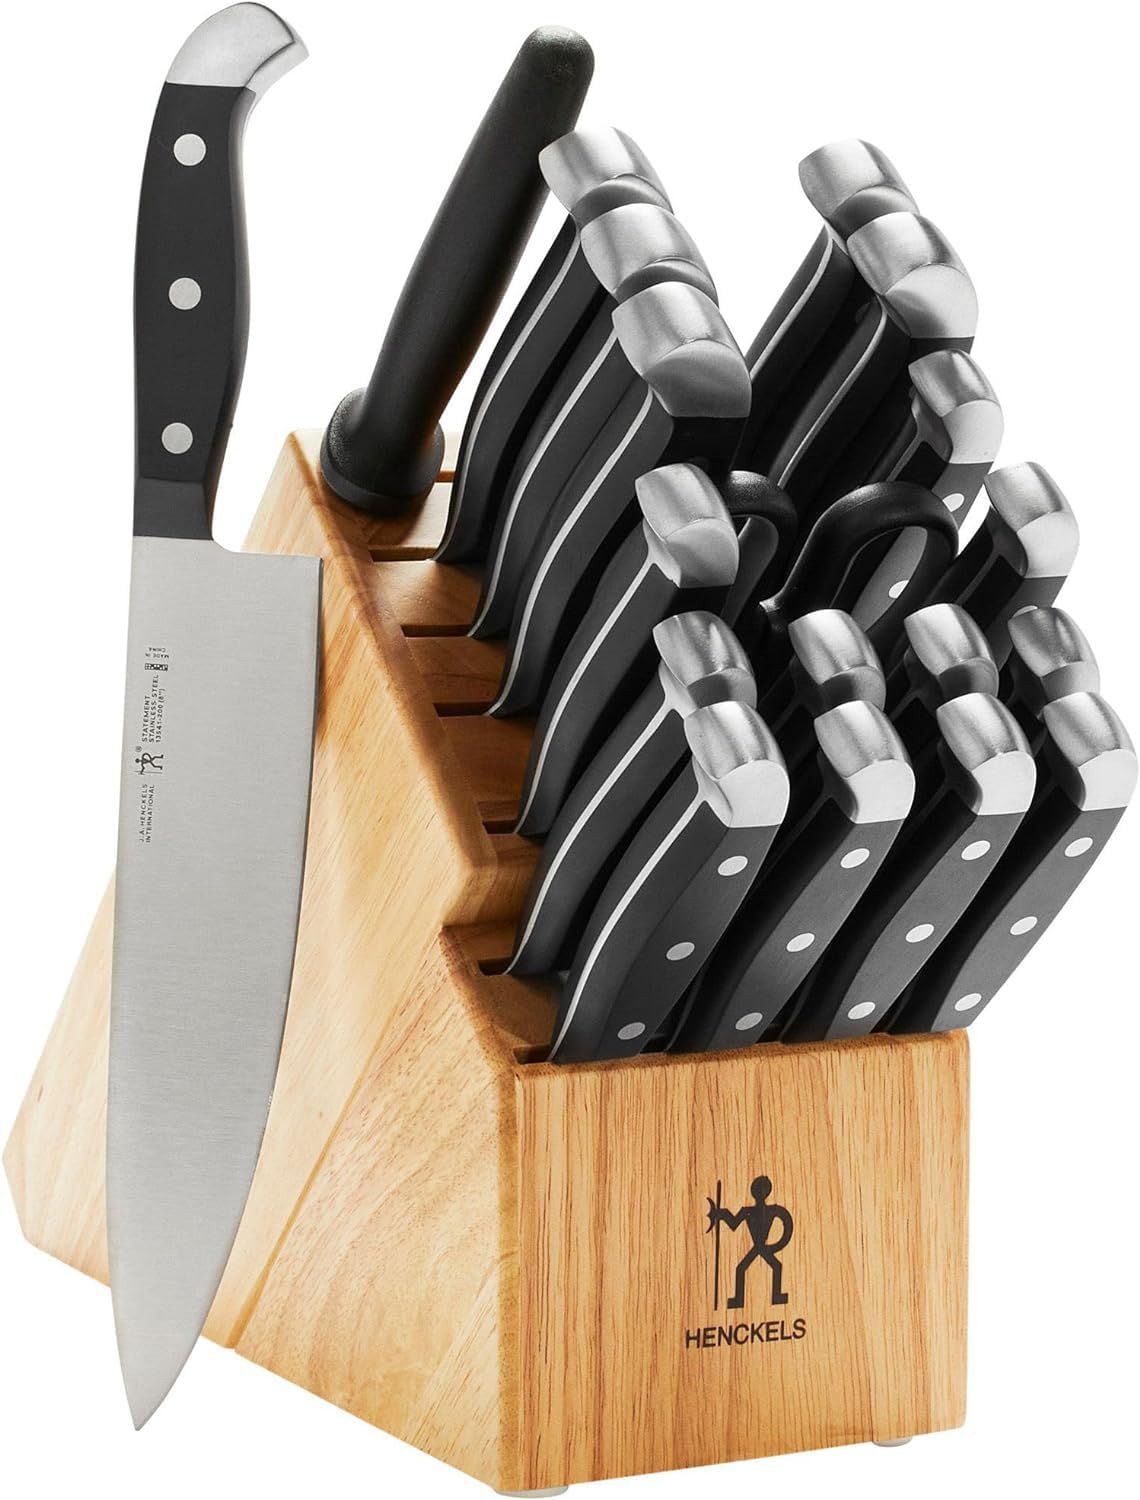 Save up to $289 on these professional knife sets ASAP